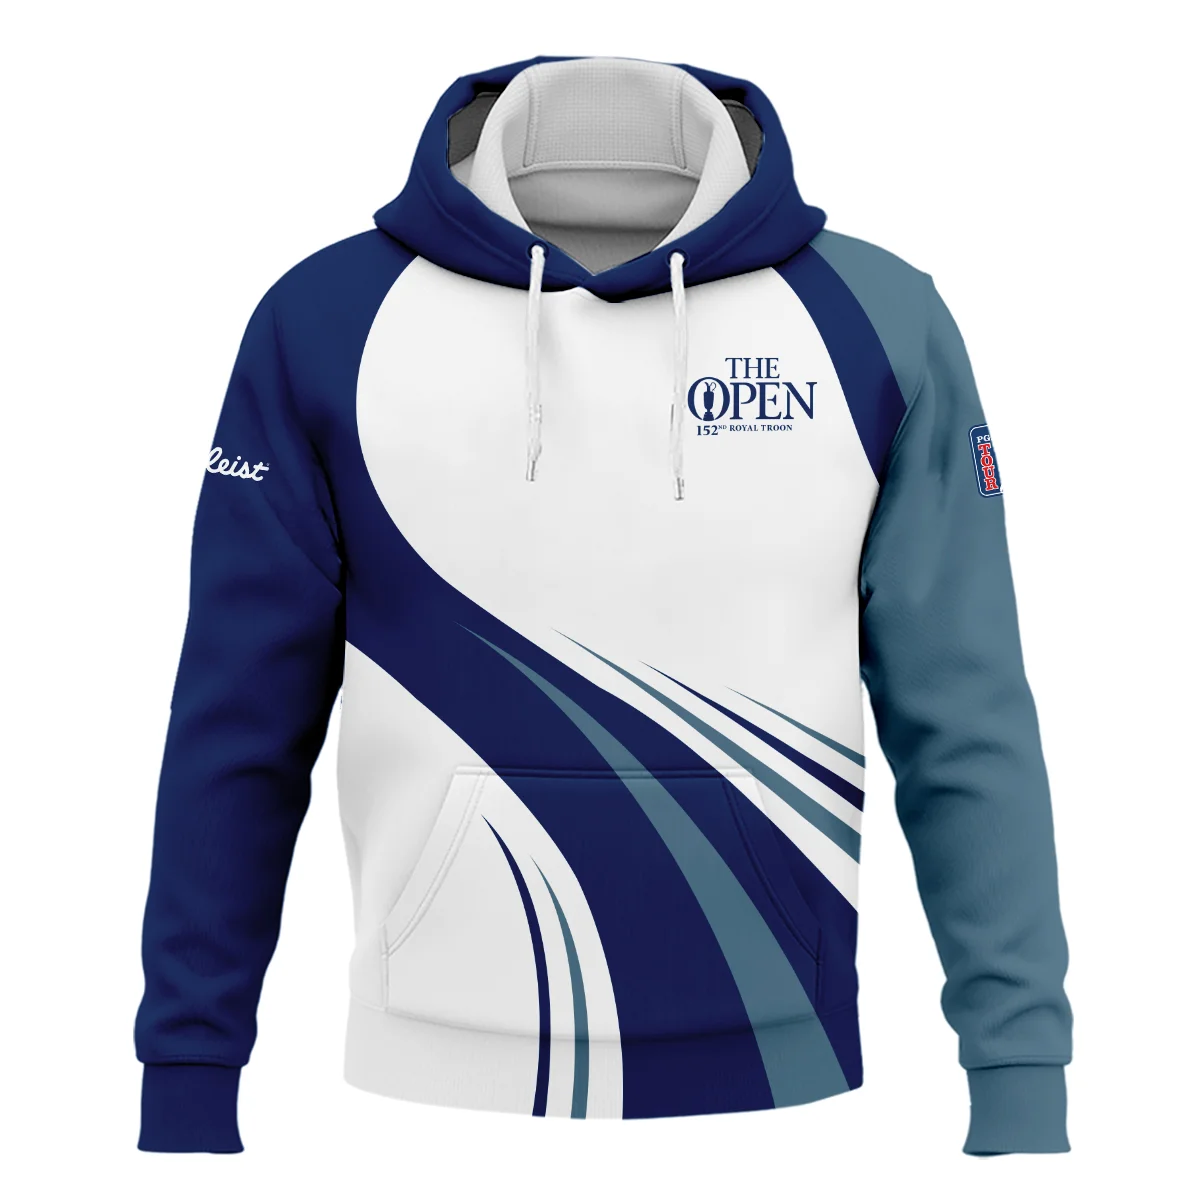 152nd Open Championship Titleist White Mostly Desaturated Dark Blue Performance Quarter Zip Sweatshirt With Pockets All Over Prints HOTOP270624A02TLTS